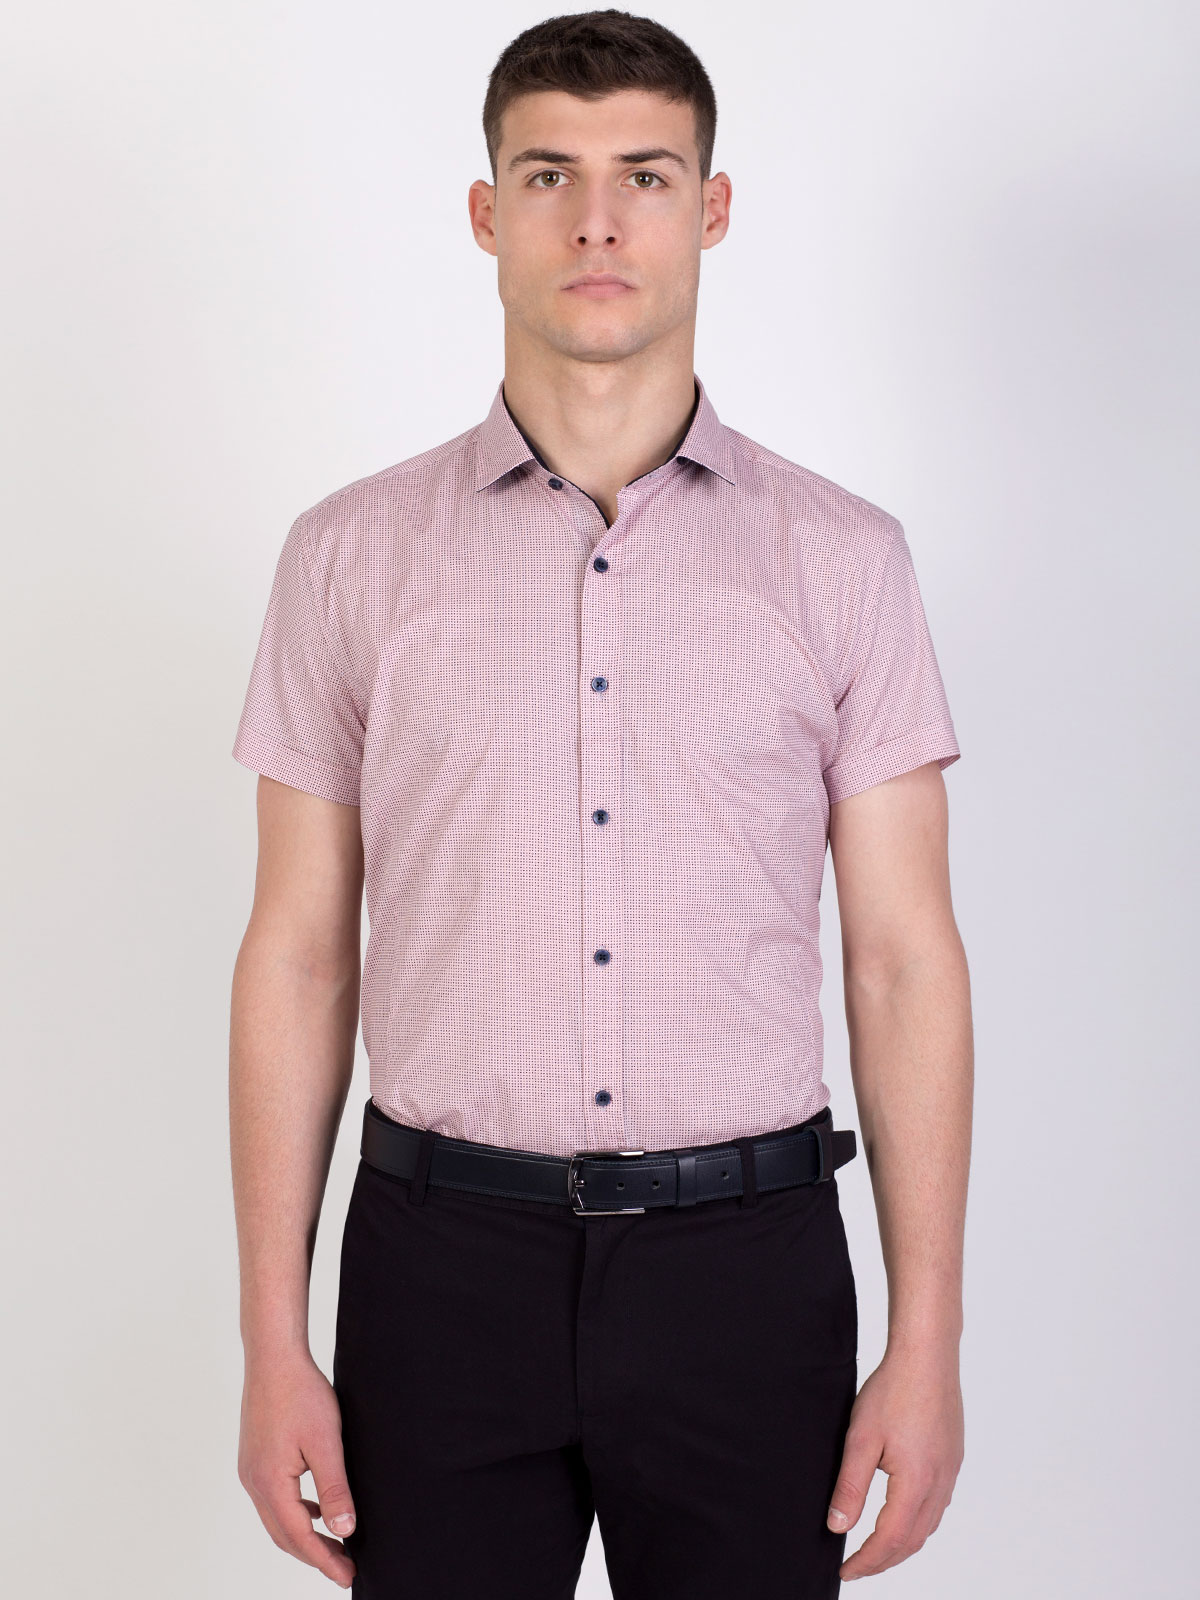 Fitted pink shirt for small figures - 80201 € 11.25 img4